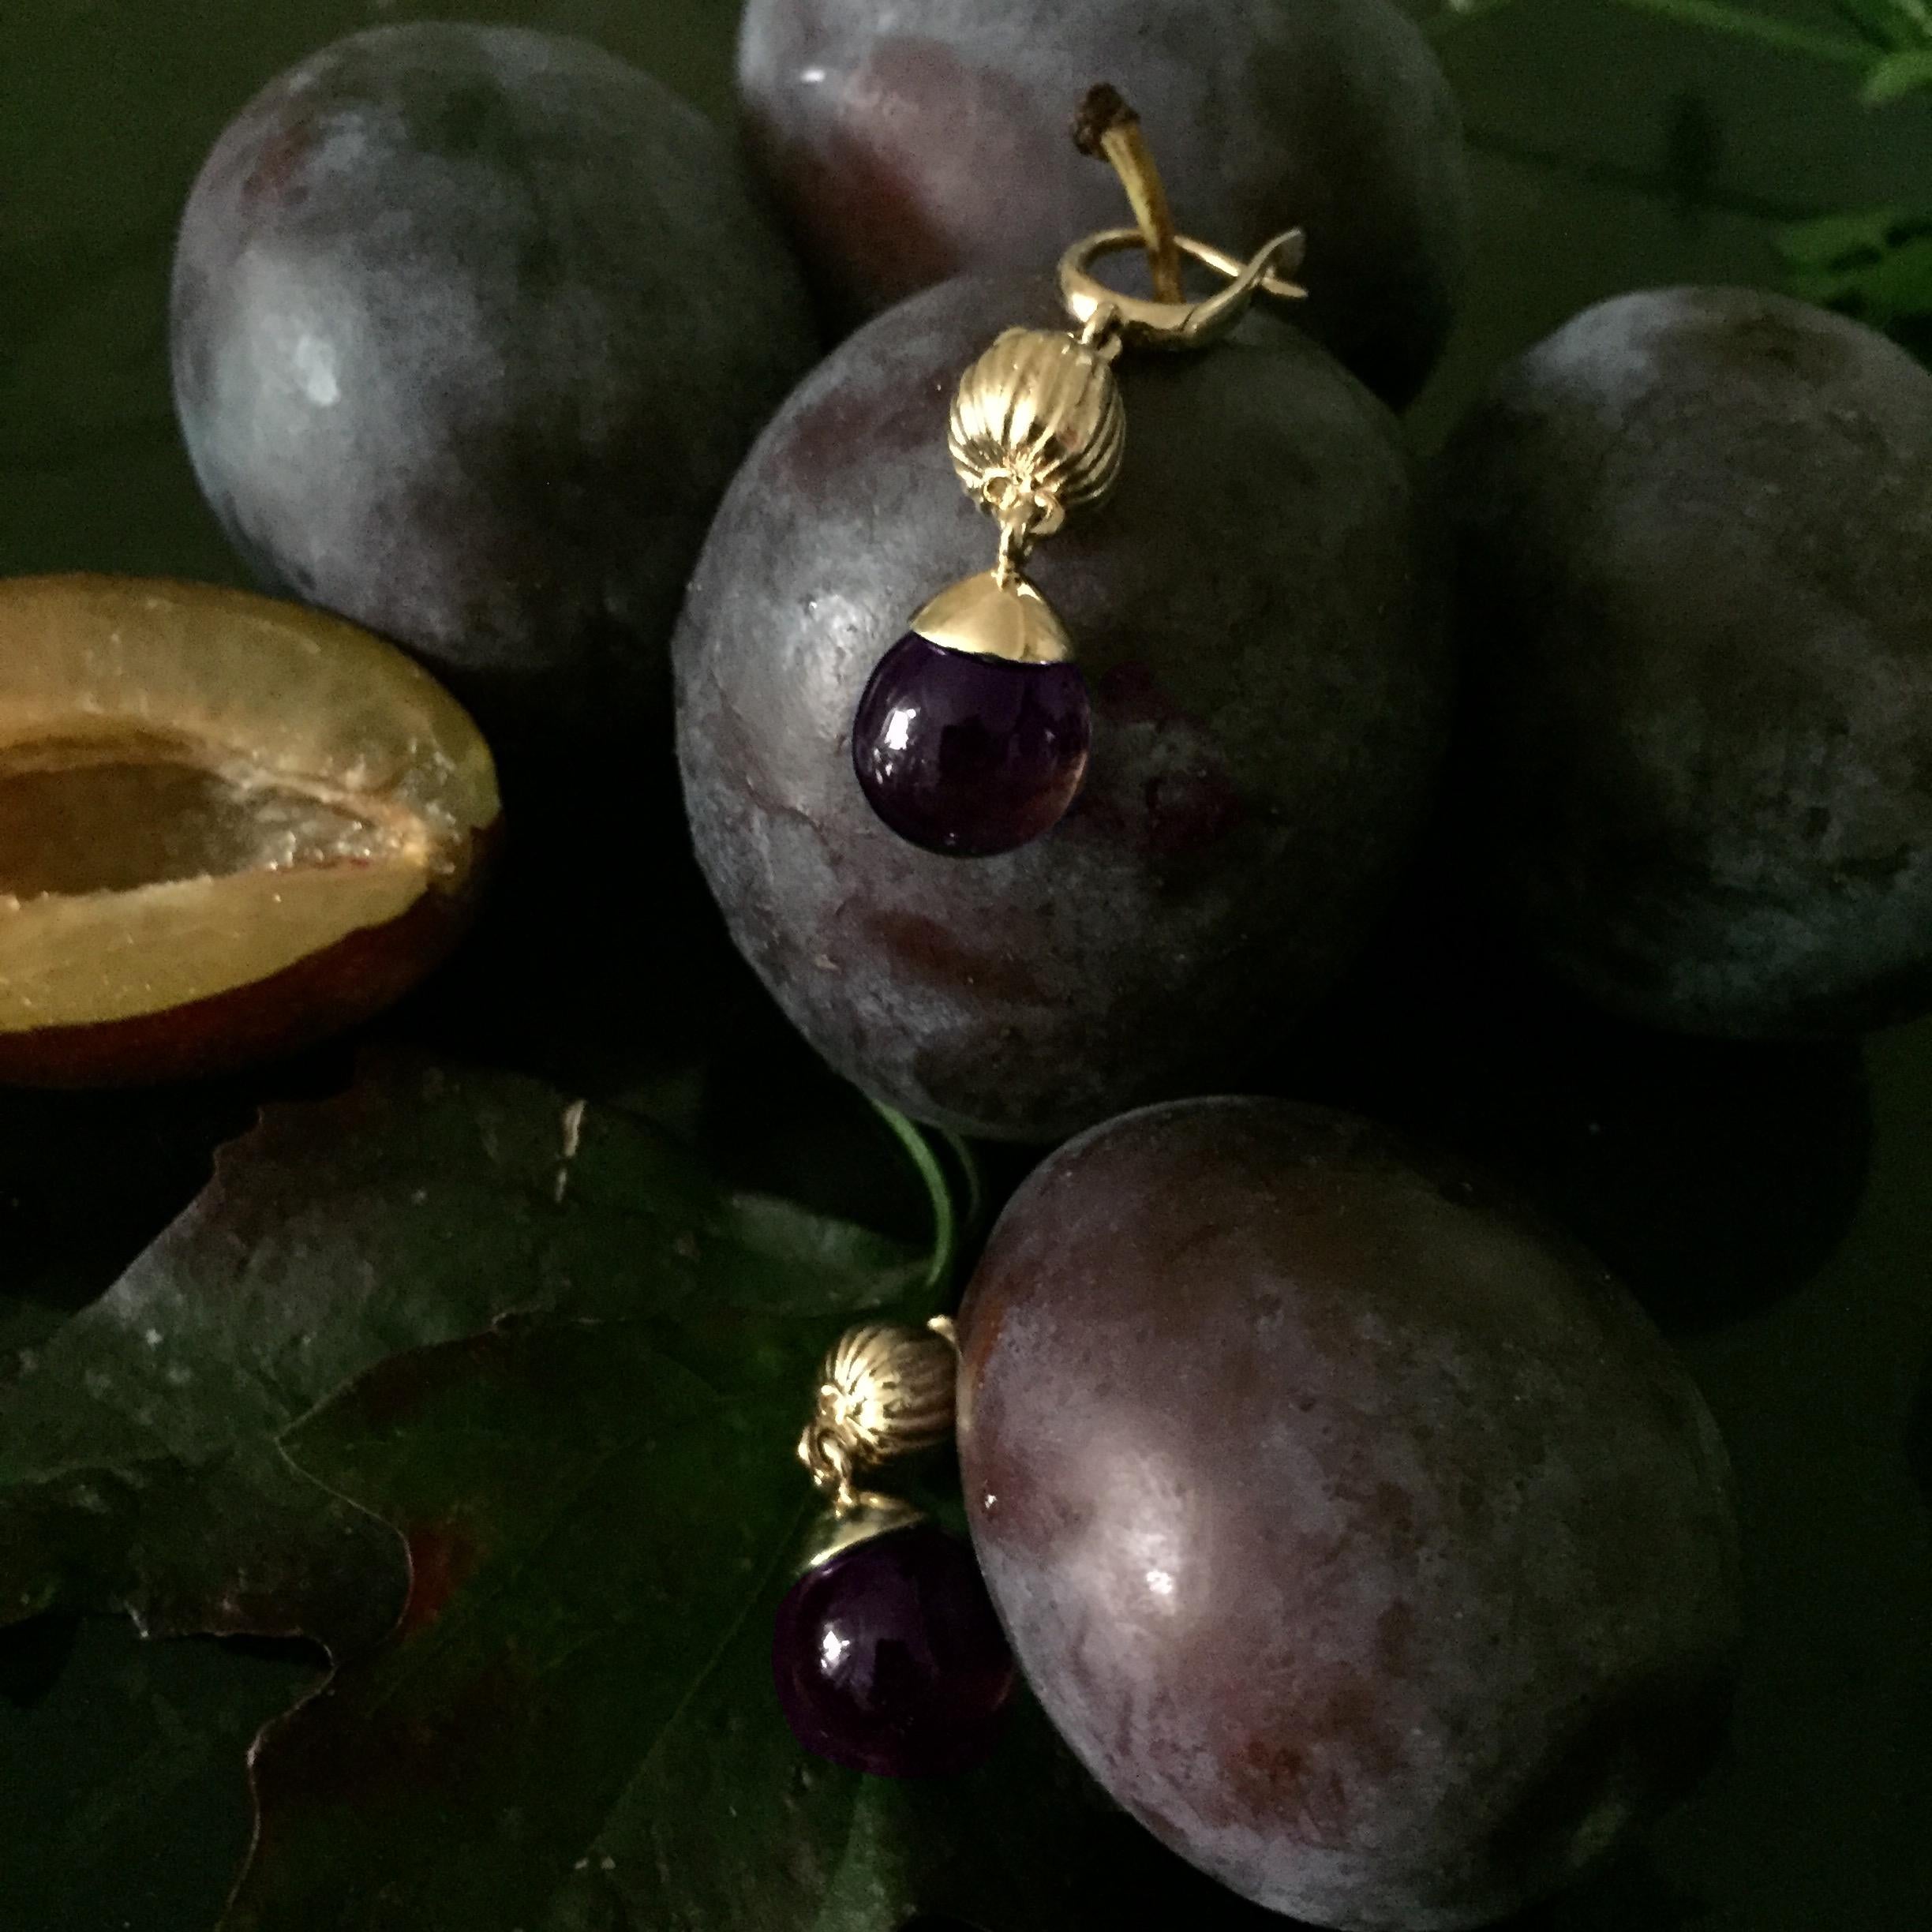 These 14 karat yellow gold Fig Fruits cocktail earrings feature cabochon amethyst drops, allowing light to pass through. They have been featured in a review by Vogue UA.

The combination of the beloved fruit motif, radiant gold, and gemstones makes